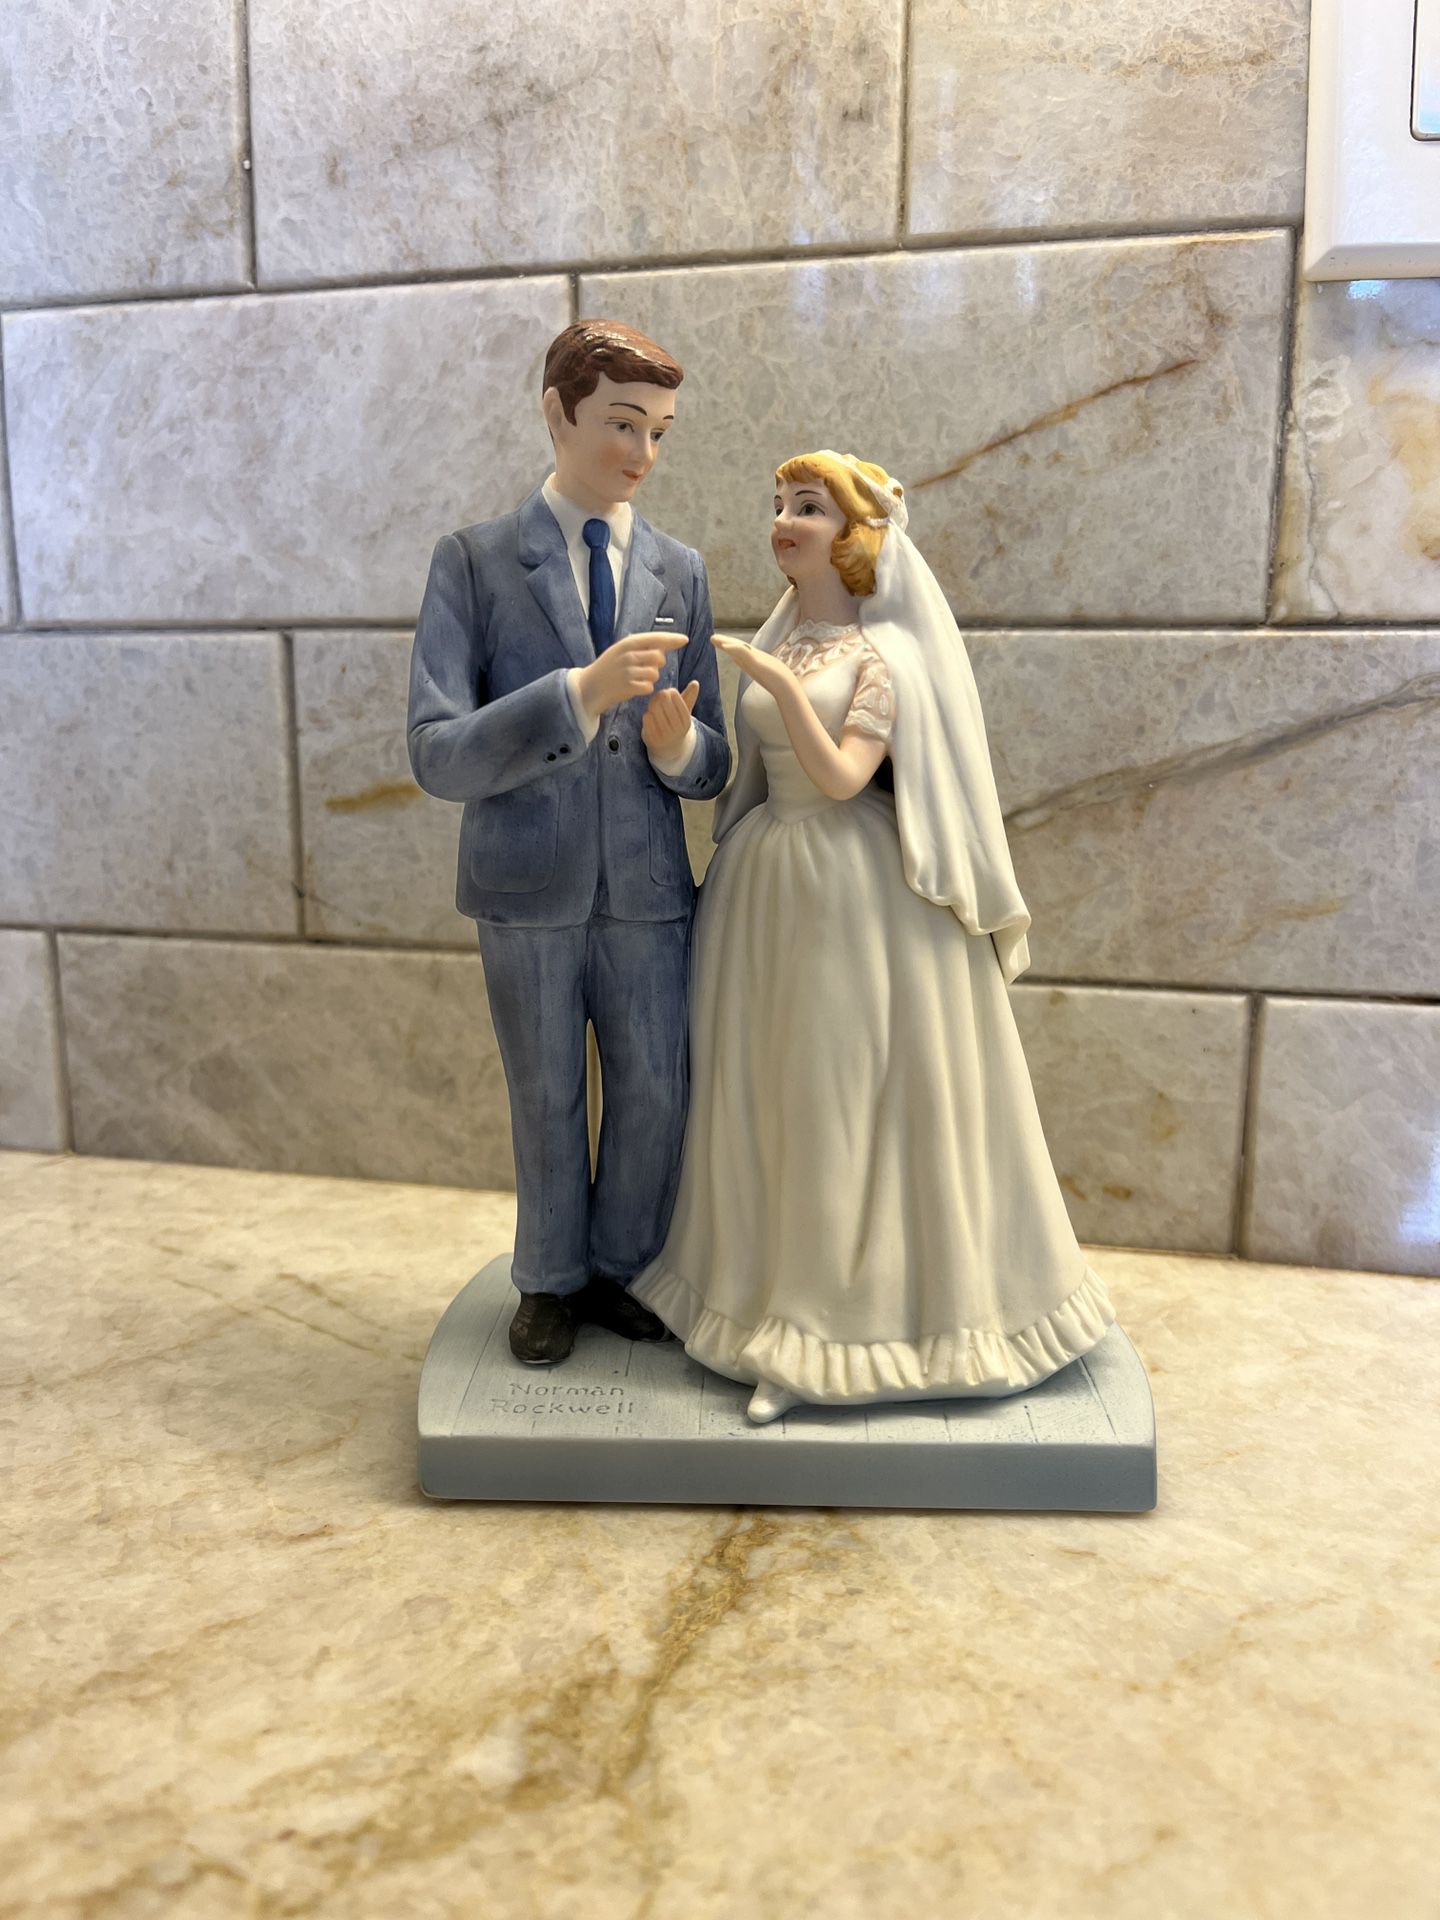 Norman Rockwell Bride and Groom Cake Topper